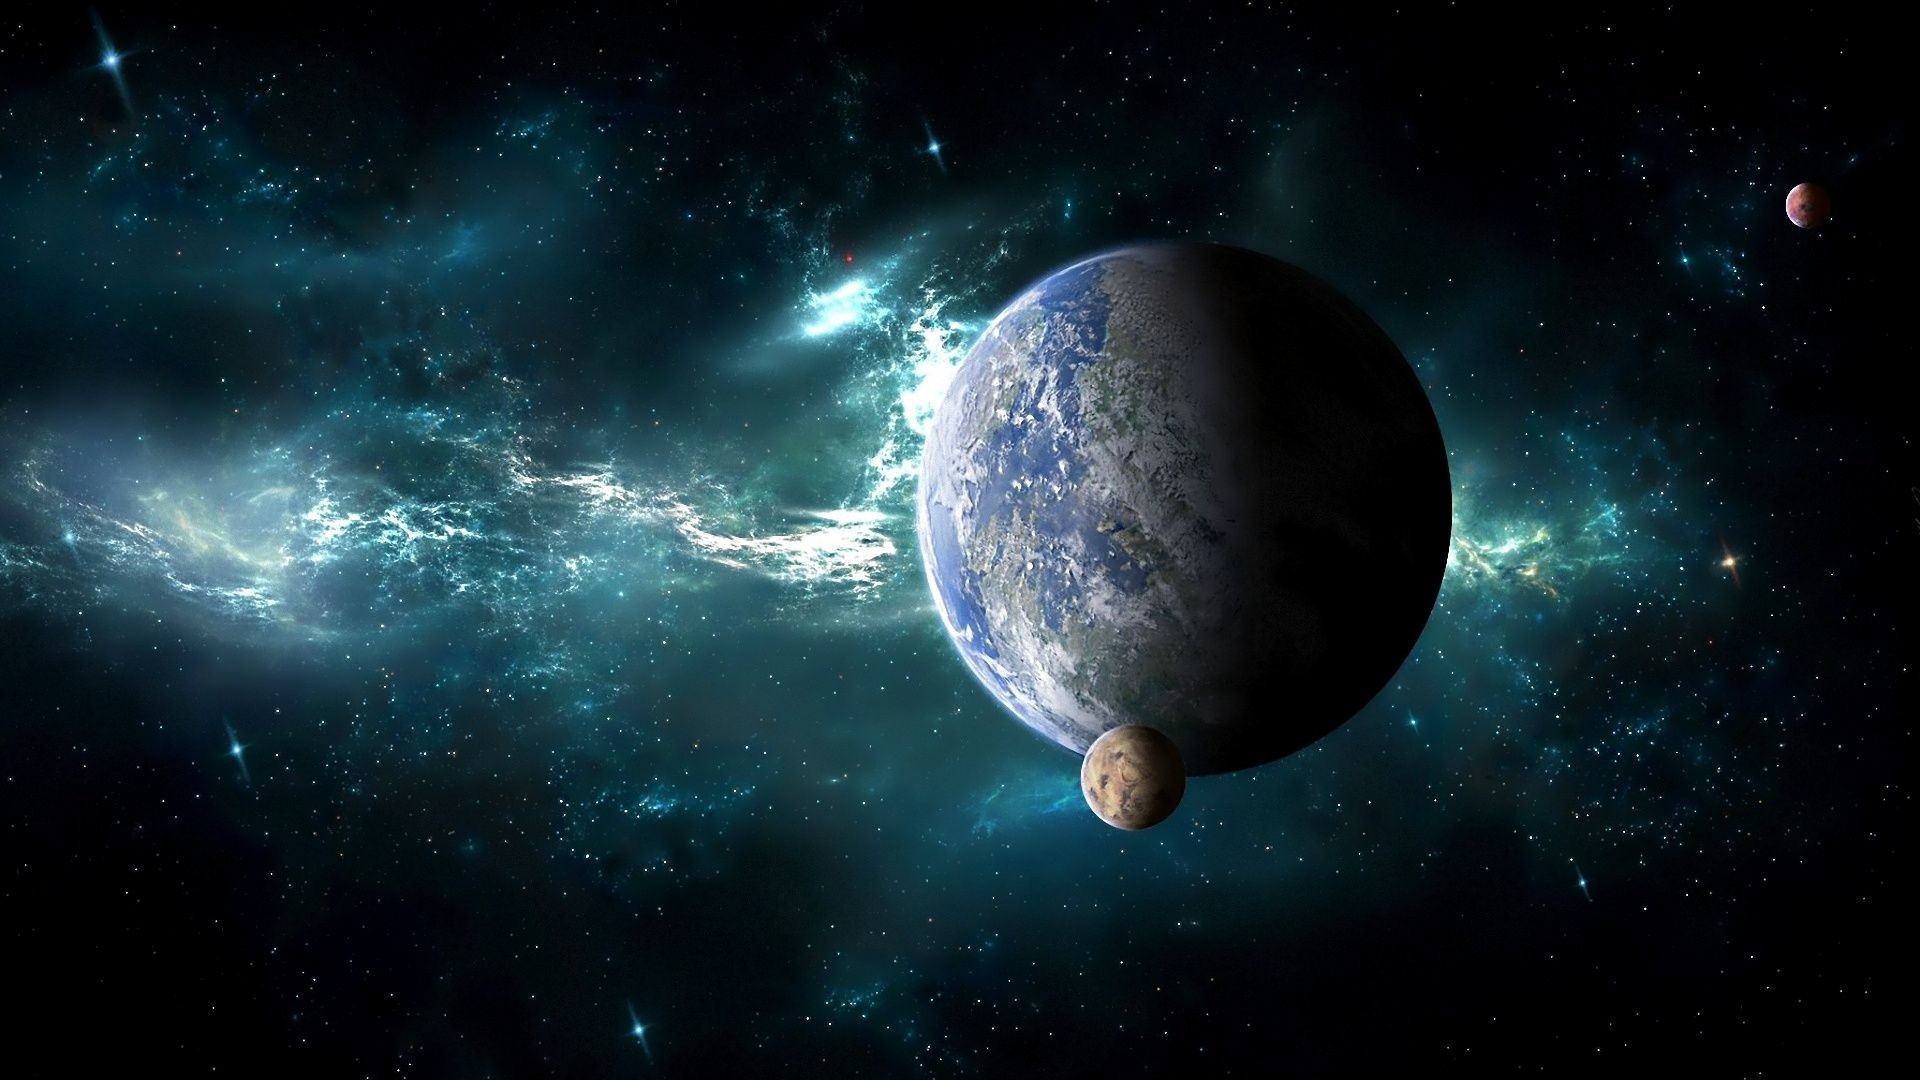 Earth From Space Wallpaper 1920ã1080 Pictures Of Earth - 3d Galaxy Wallpaper For Pc - HD Wallpaper 